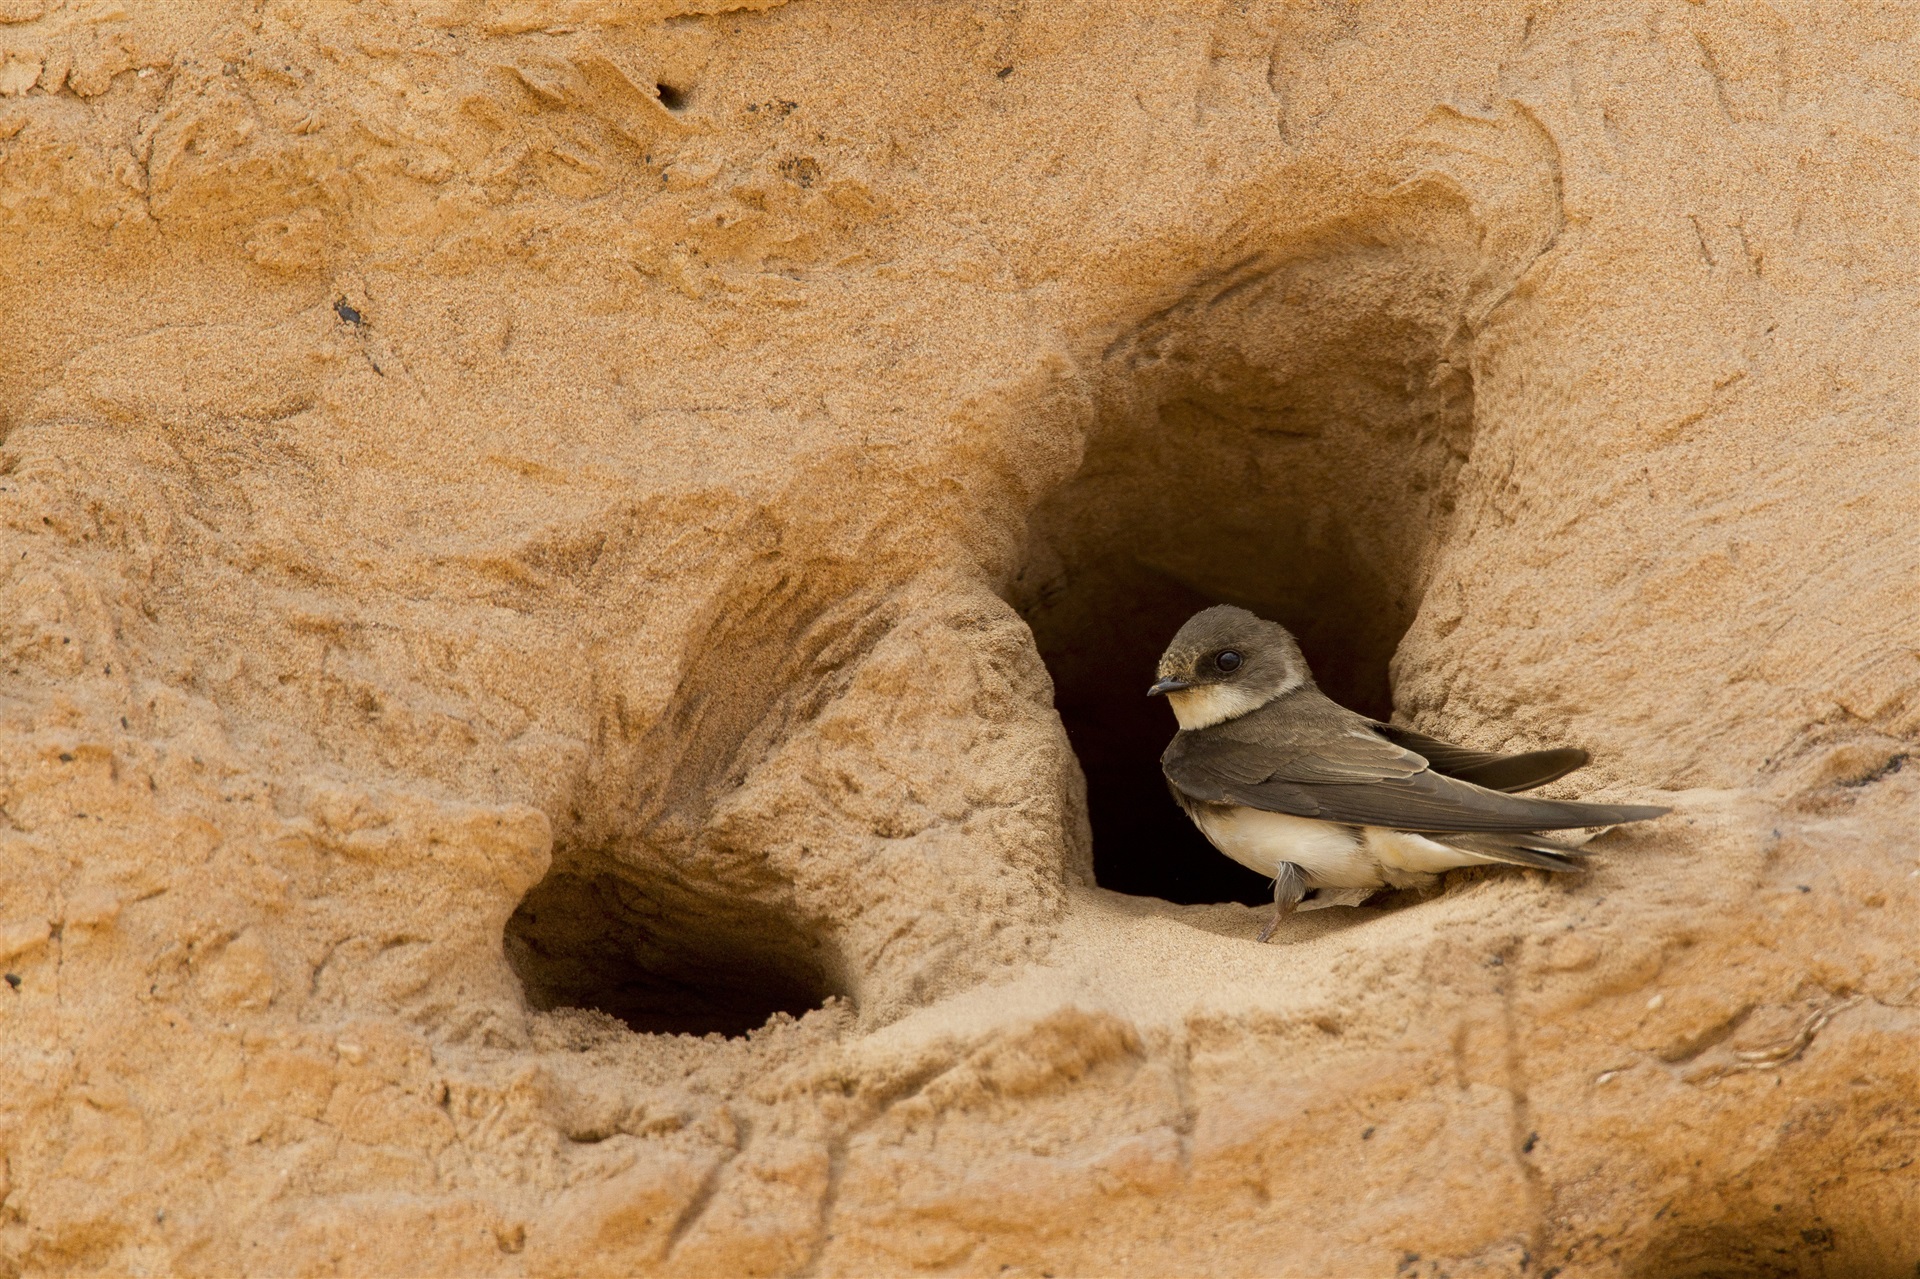 A Sand Martin perched on the edge of a hole in a sandy cliff.